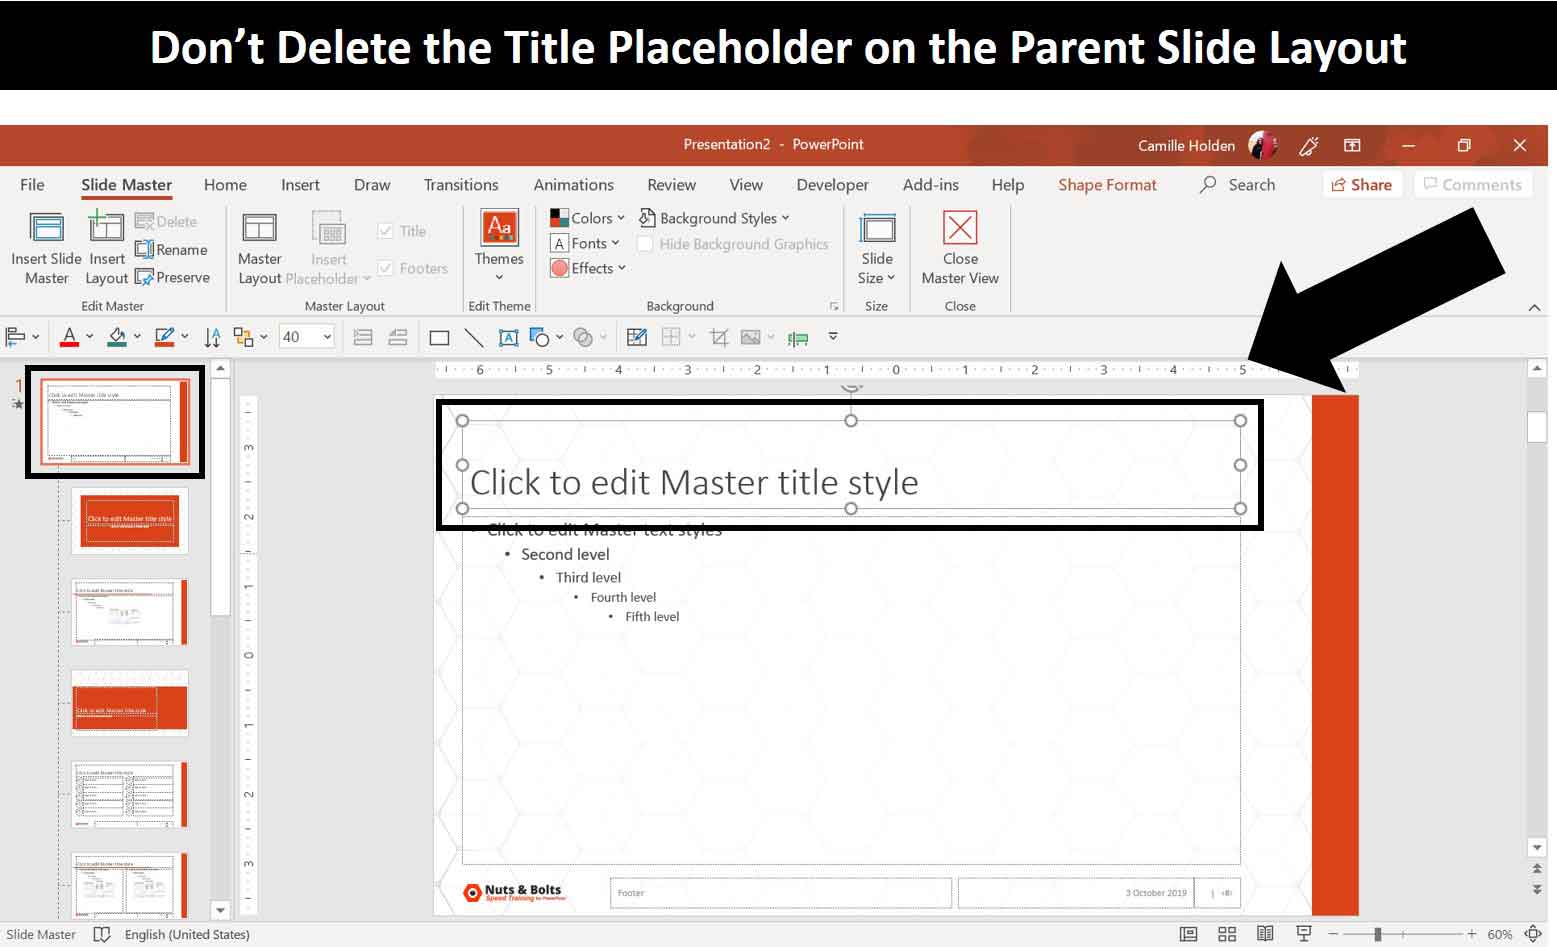 Don't delete the title placeholder on your slide master for your PowerPoint templates because it will break your slide layouts